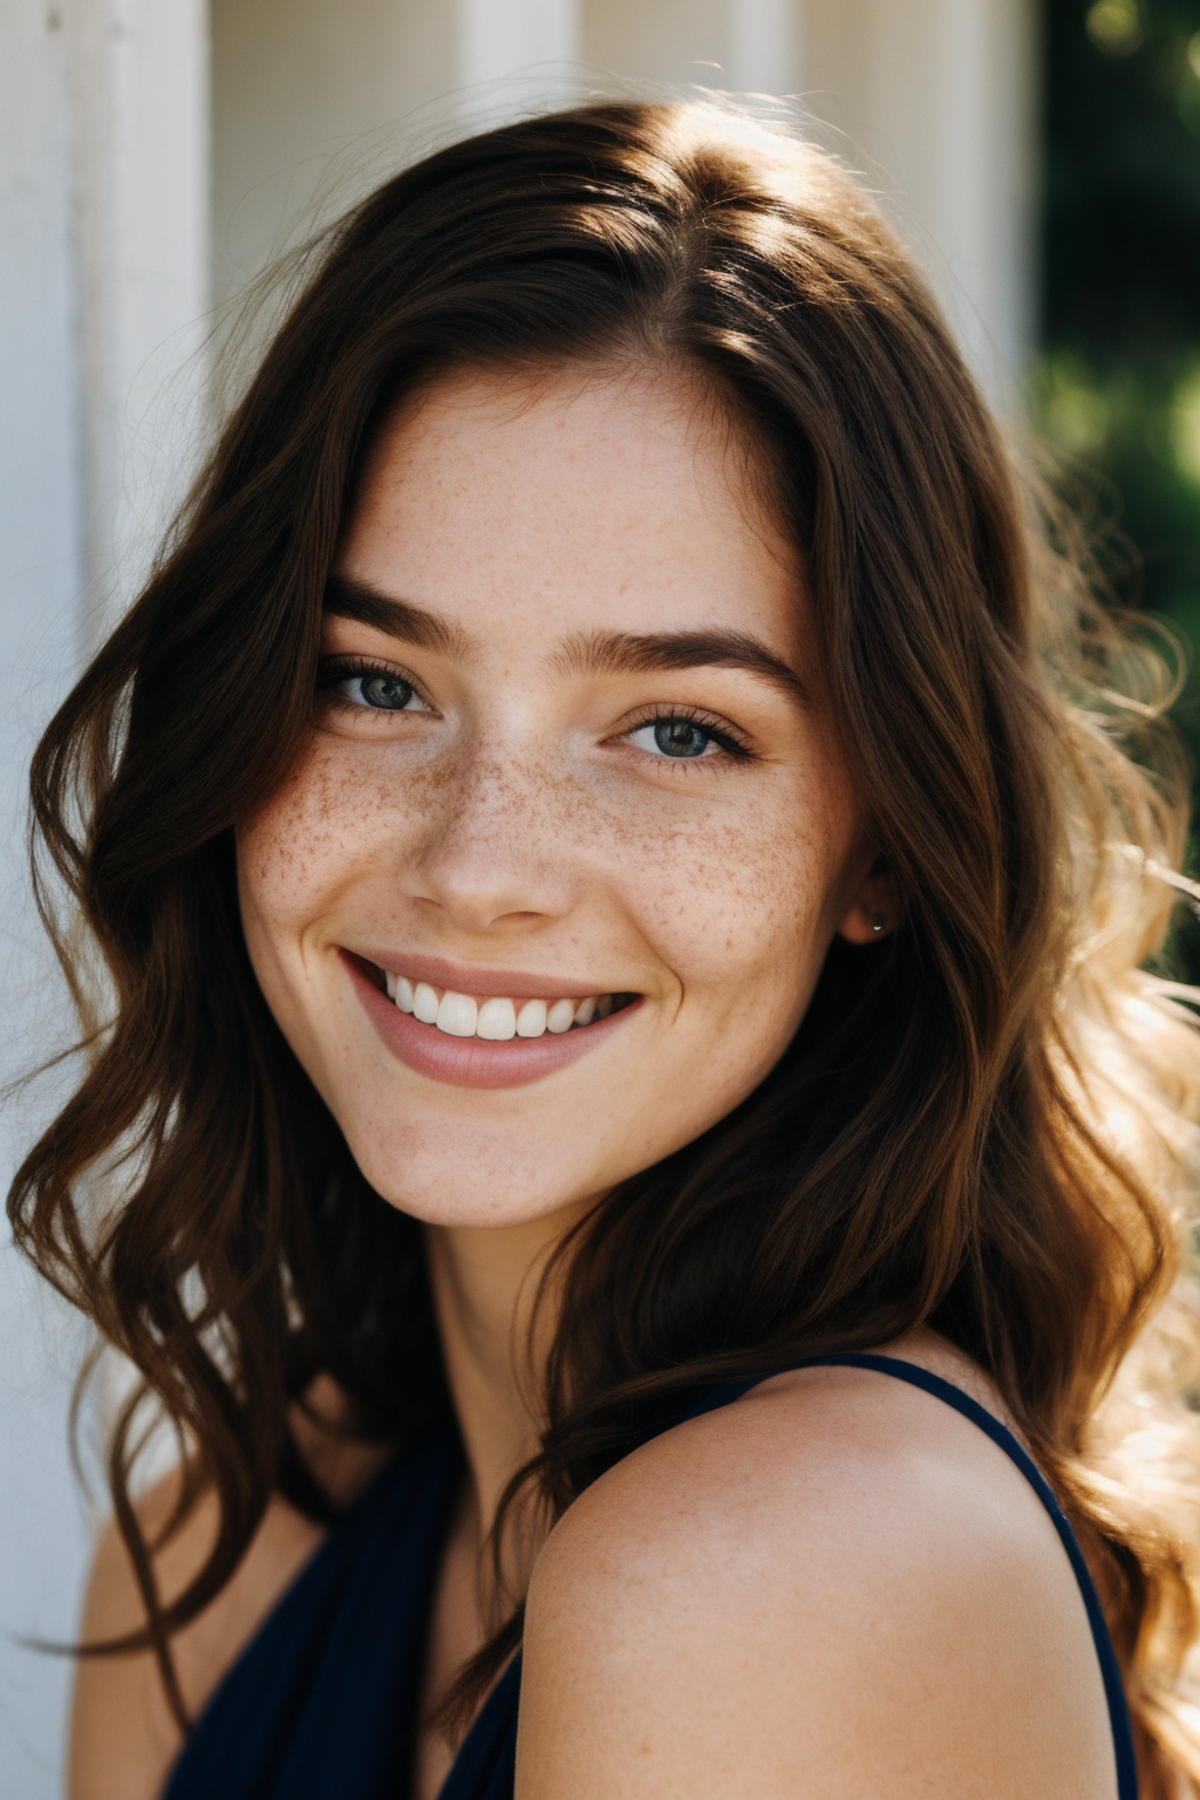 A young woman with freckles smiles for the camera.